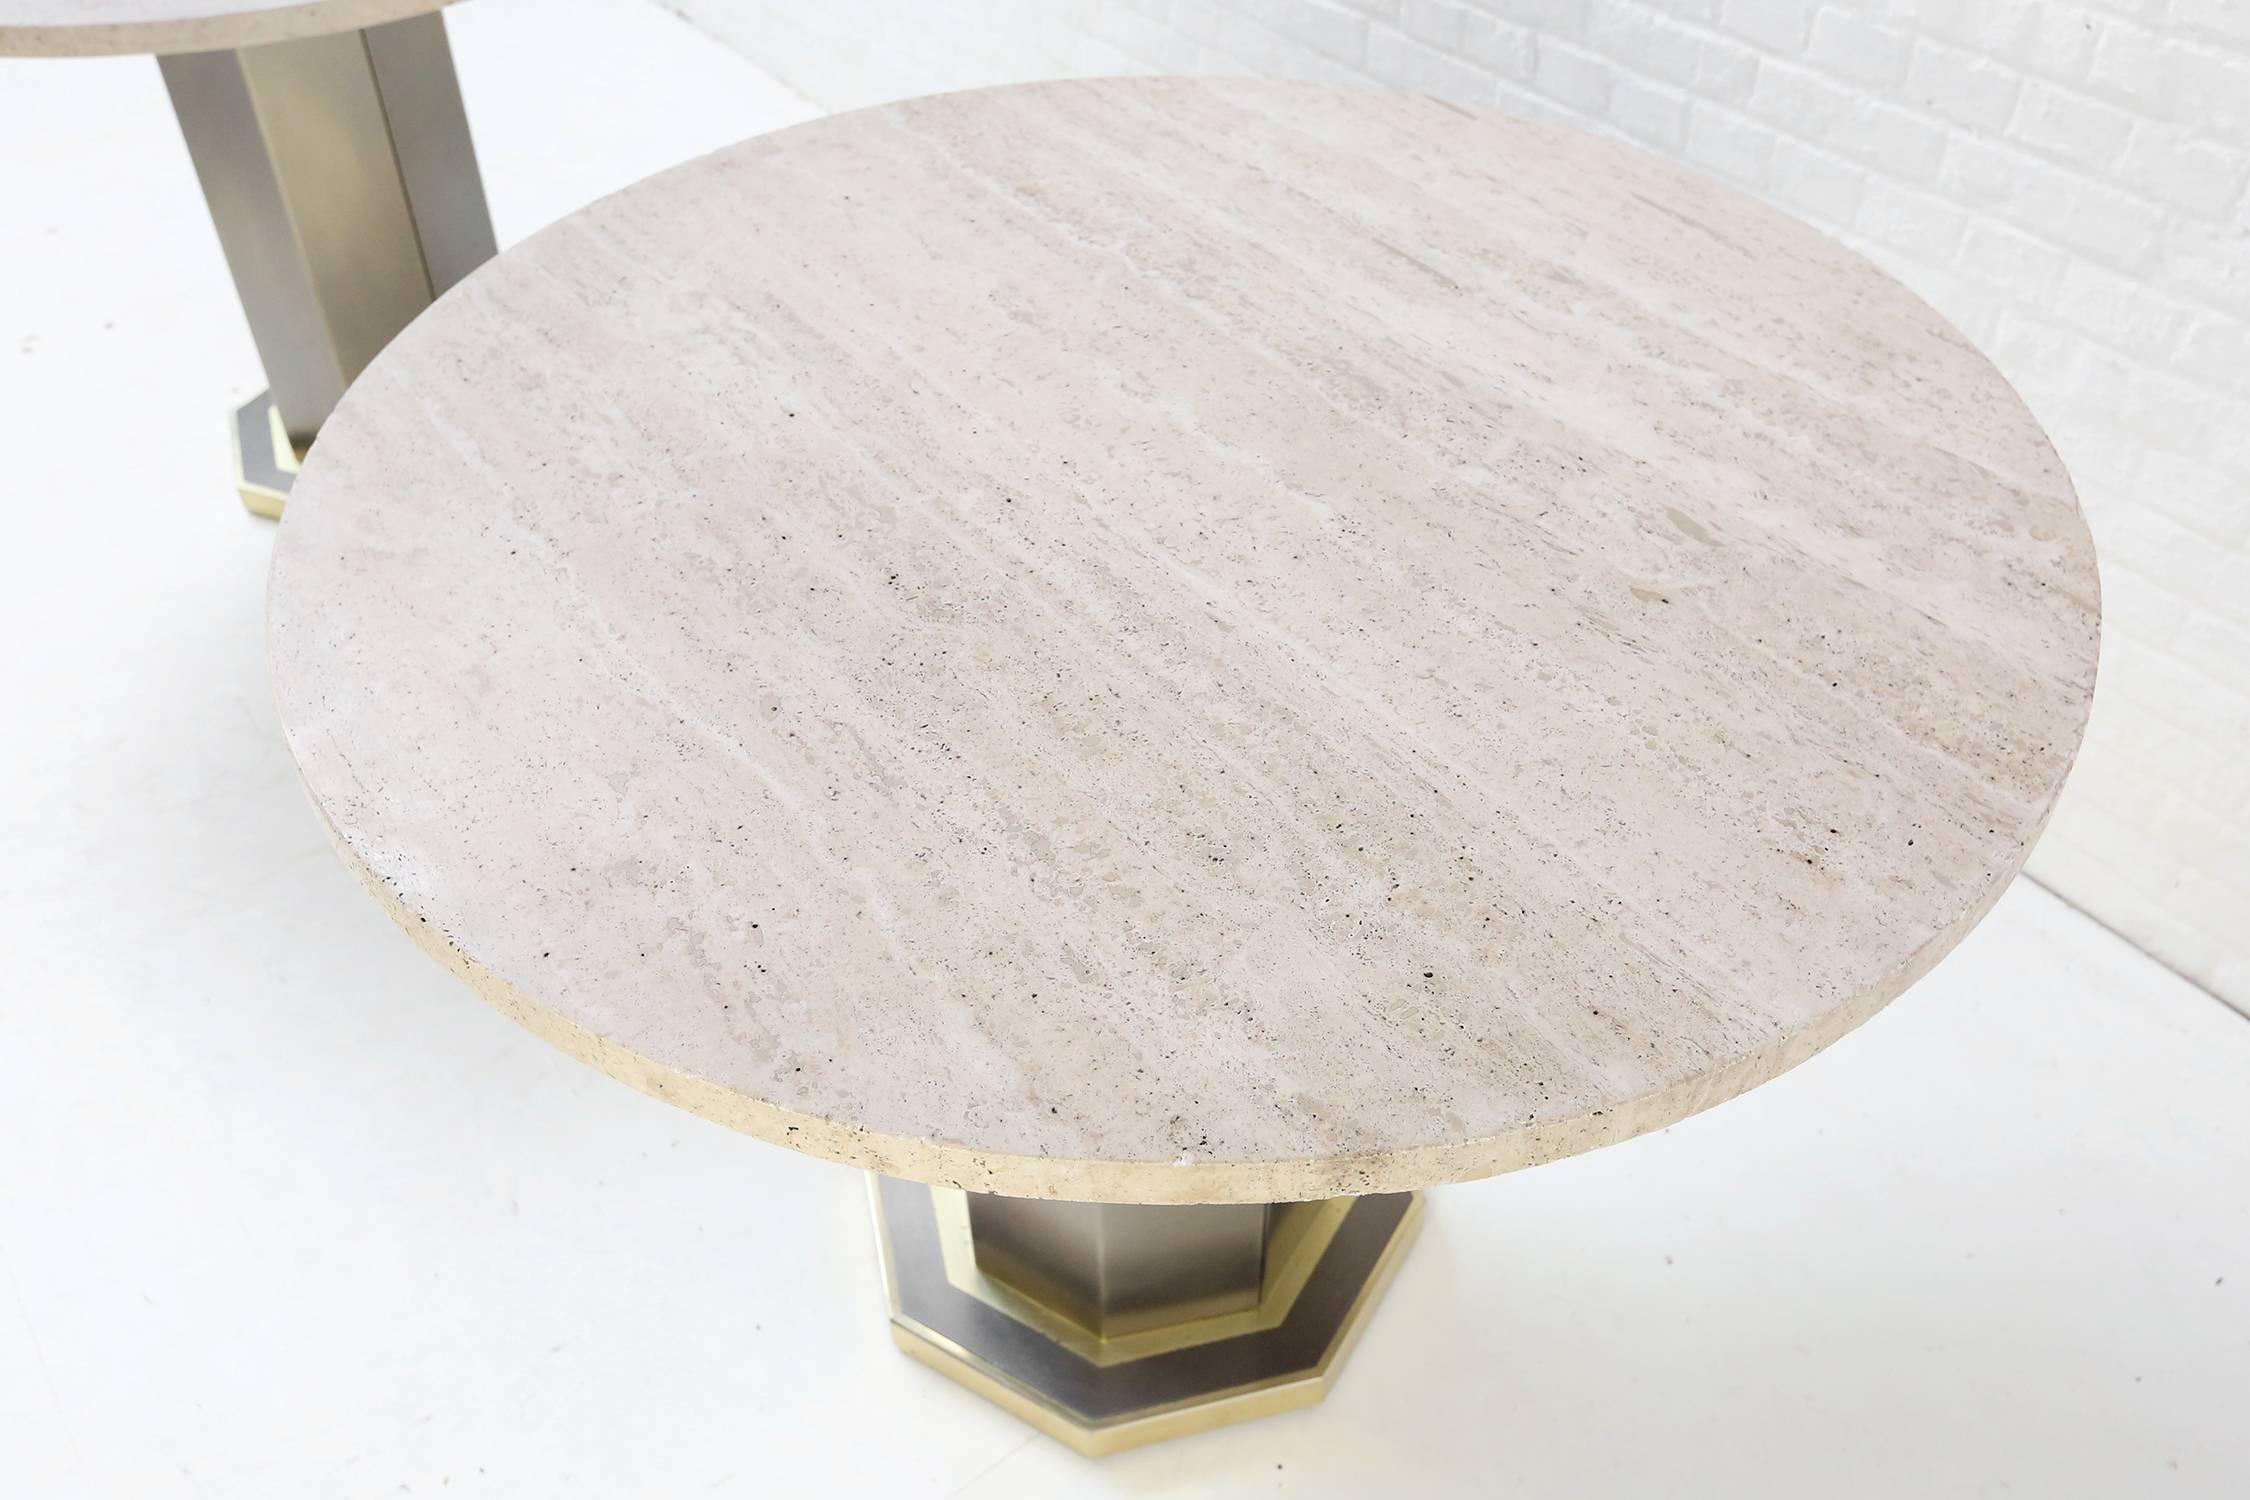 Rare pair of travertine dining tables with travertine top and brass and brushed steel bases, probably by Maison Jansen or Belgo Chrome.